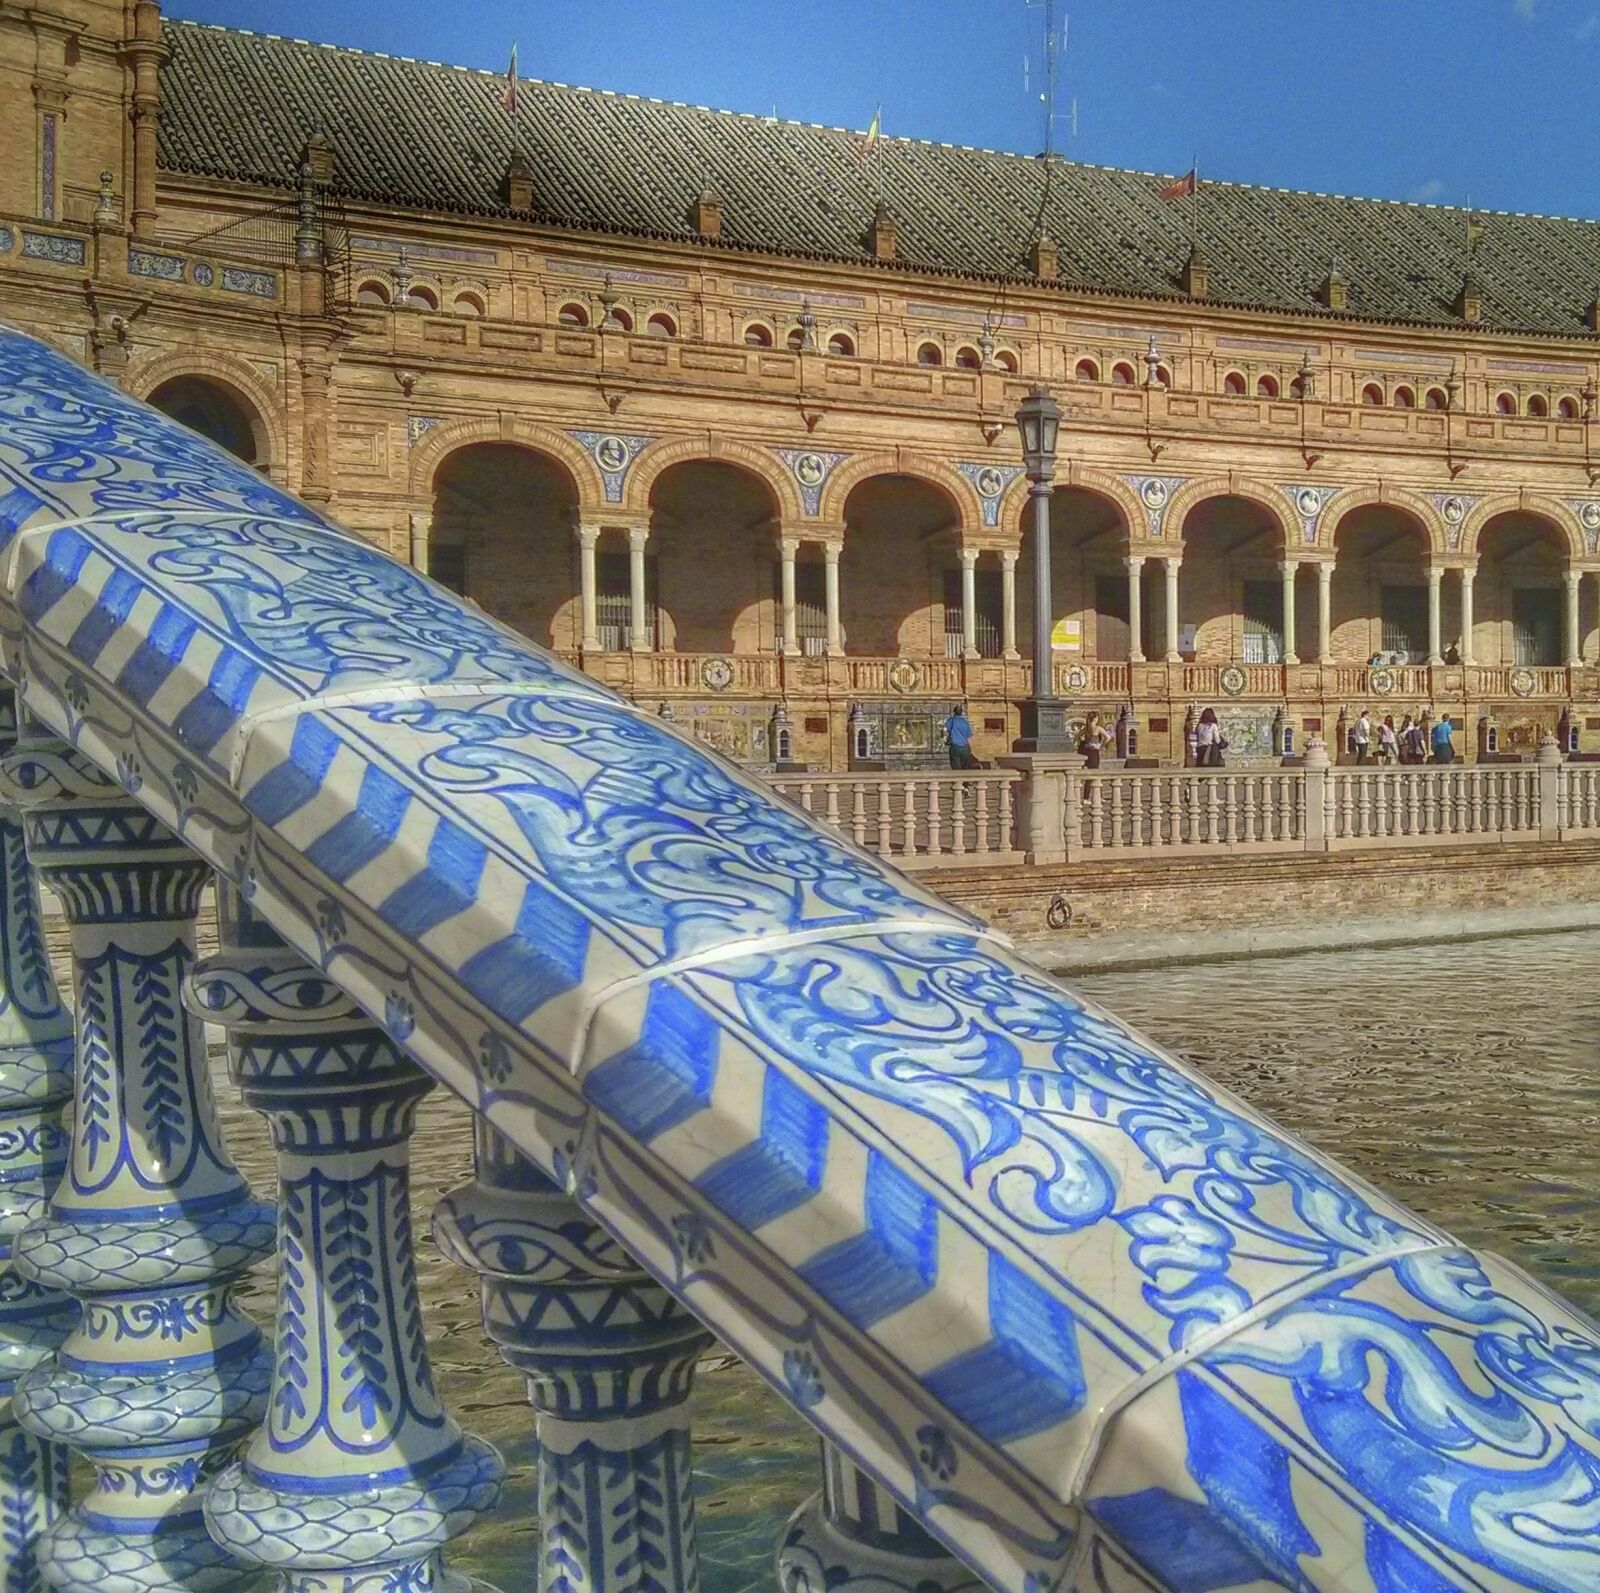 LG Nexus 4 sample photo. Spain, seville, andalusia photography